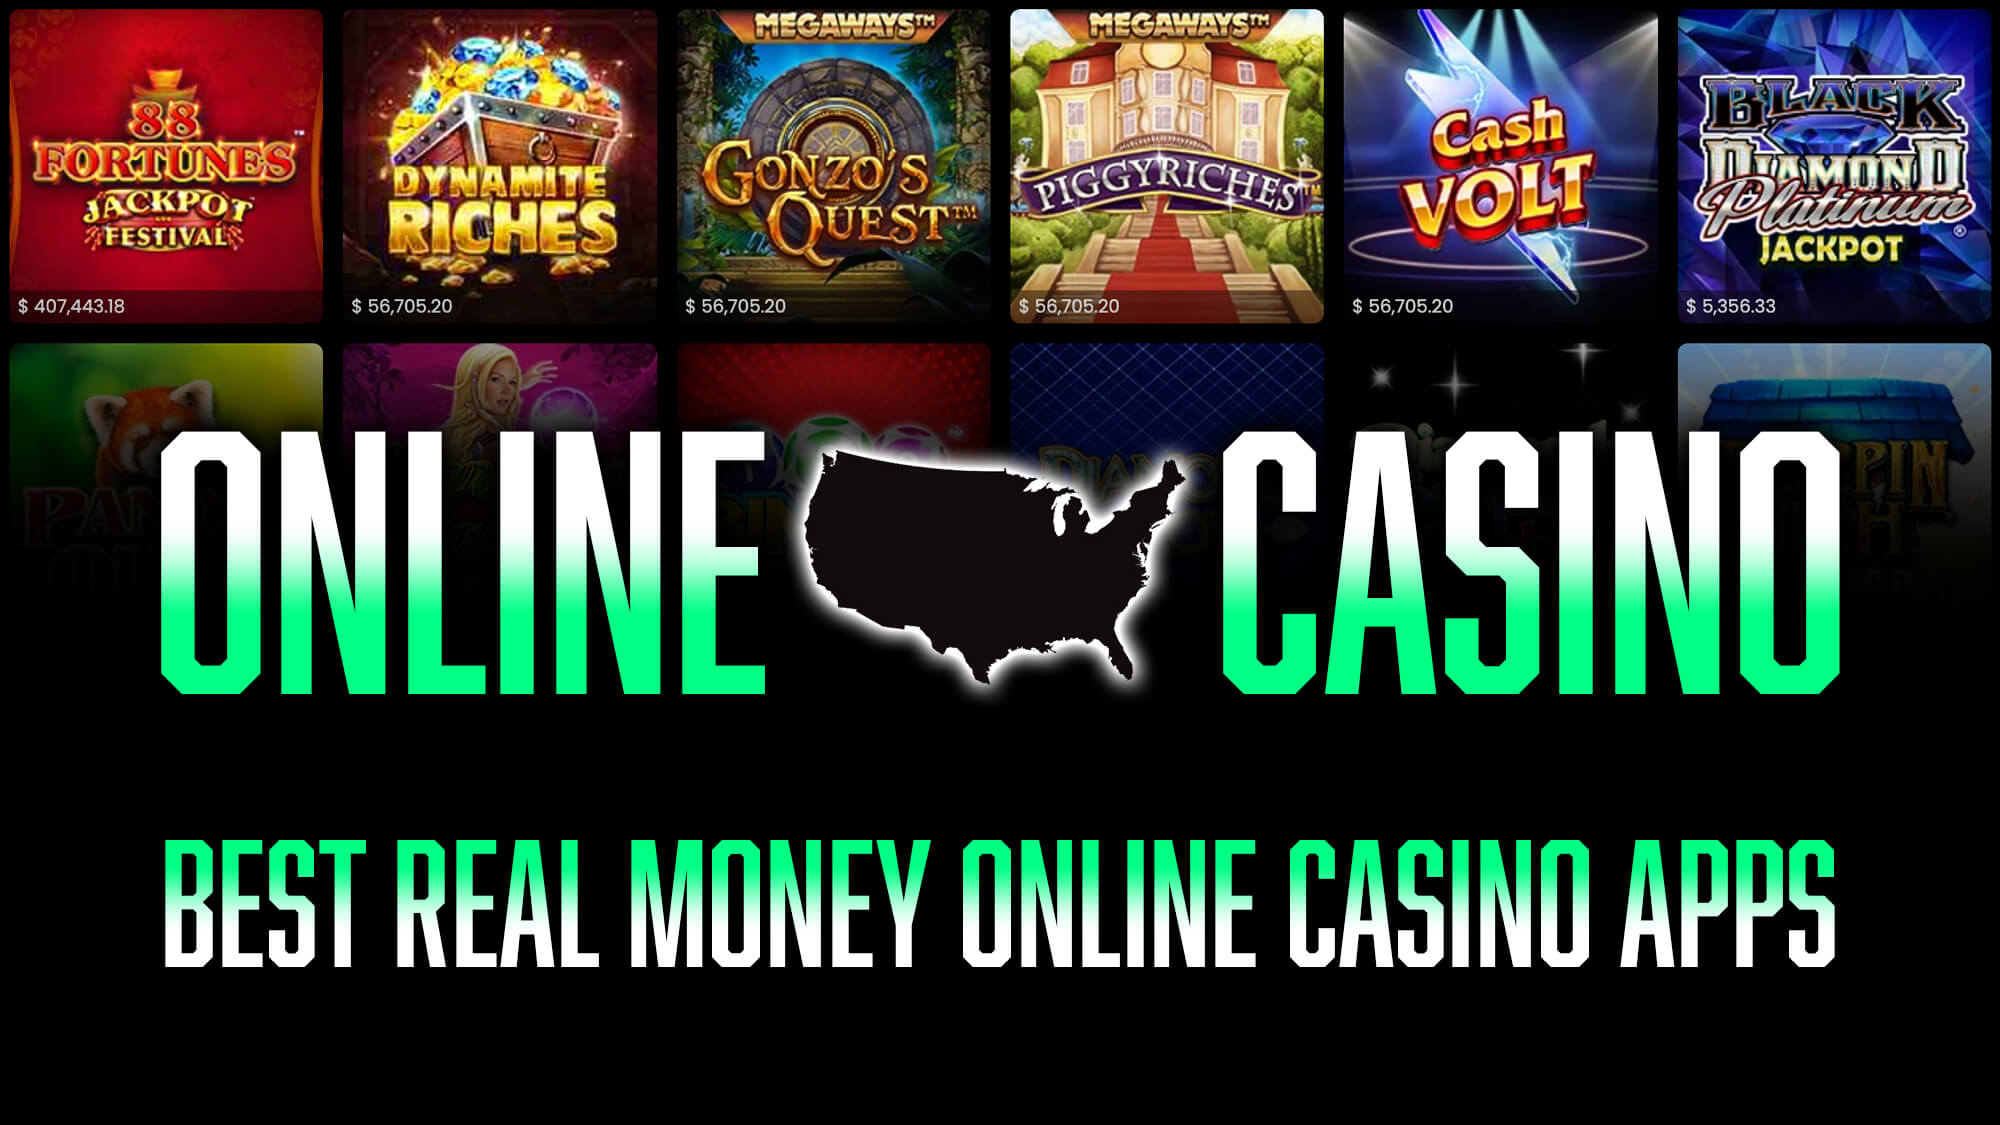 Is neue online casinos Luxembourg Worth $ To You?